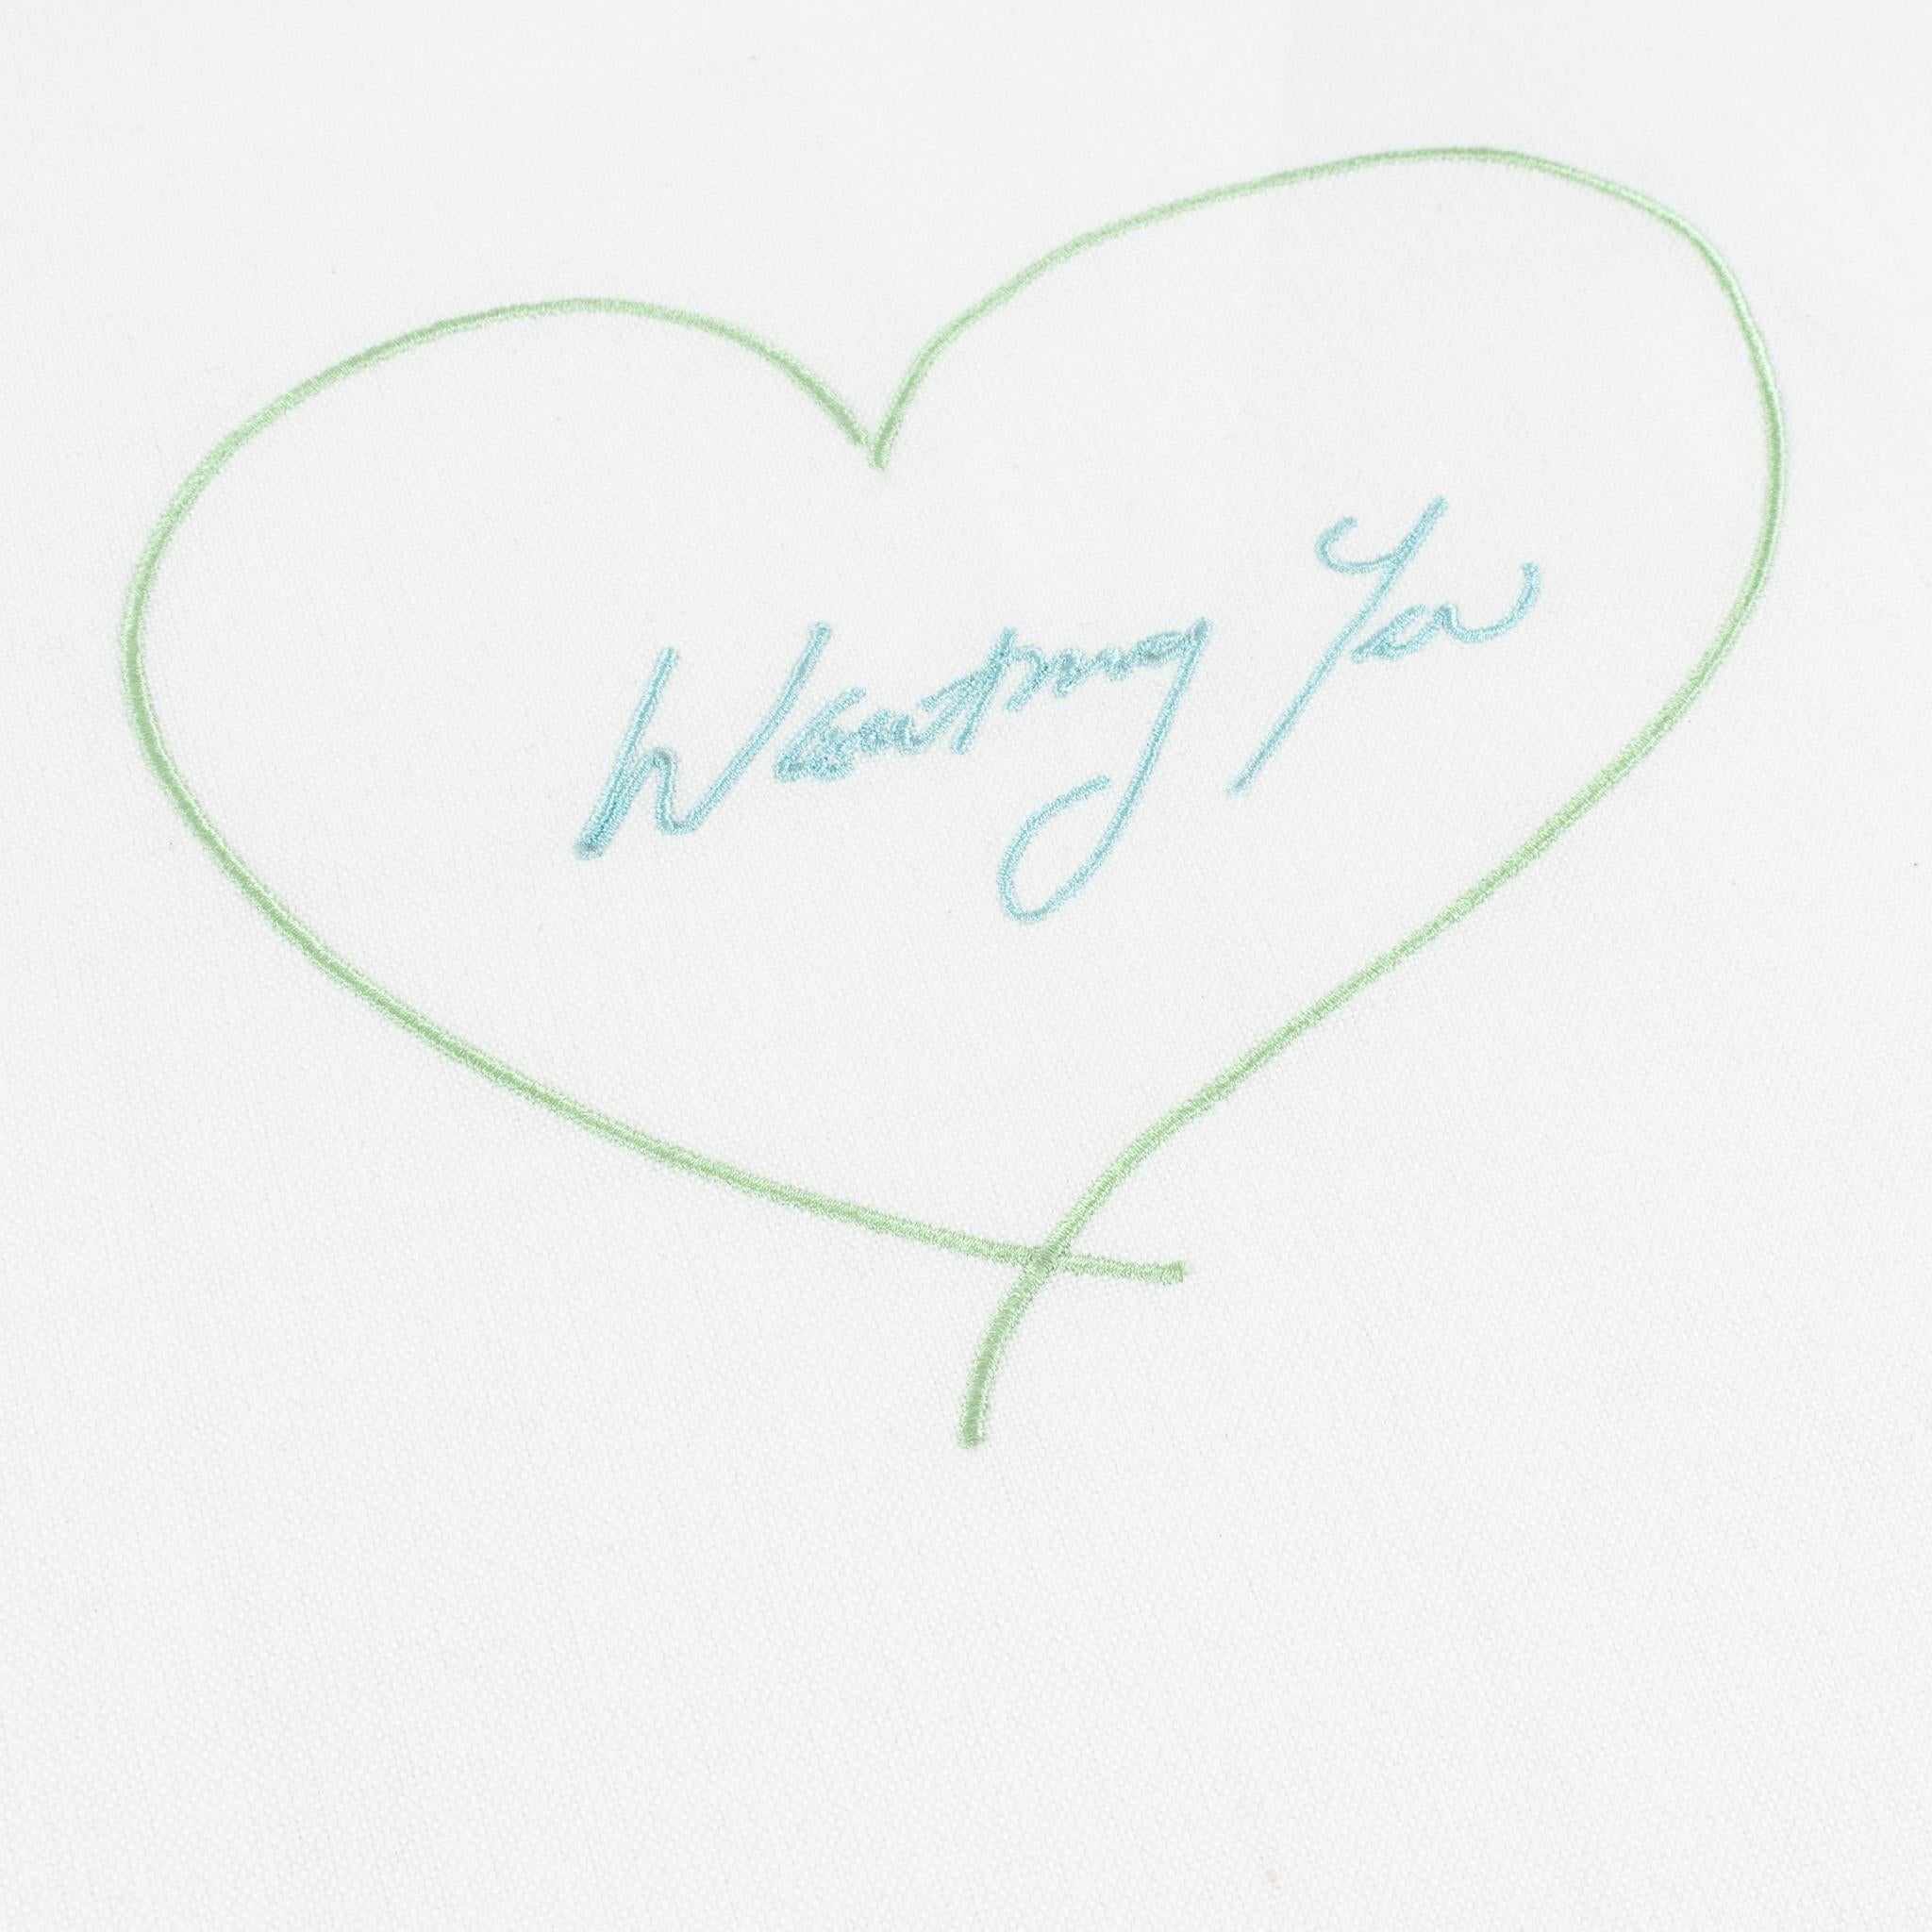 Wanting You, Napkin (Green and Blue) - Contemporary Print by Tracey Emin